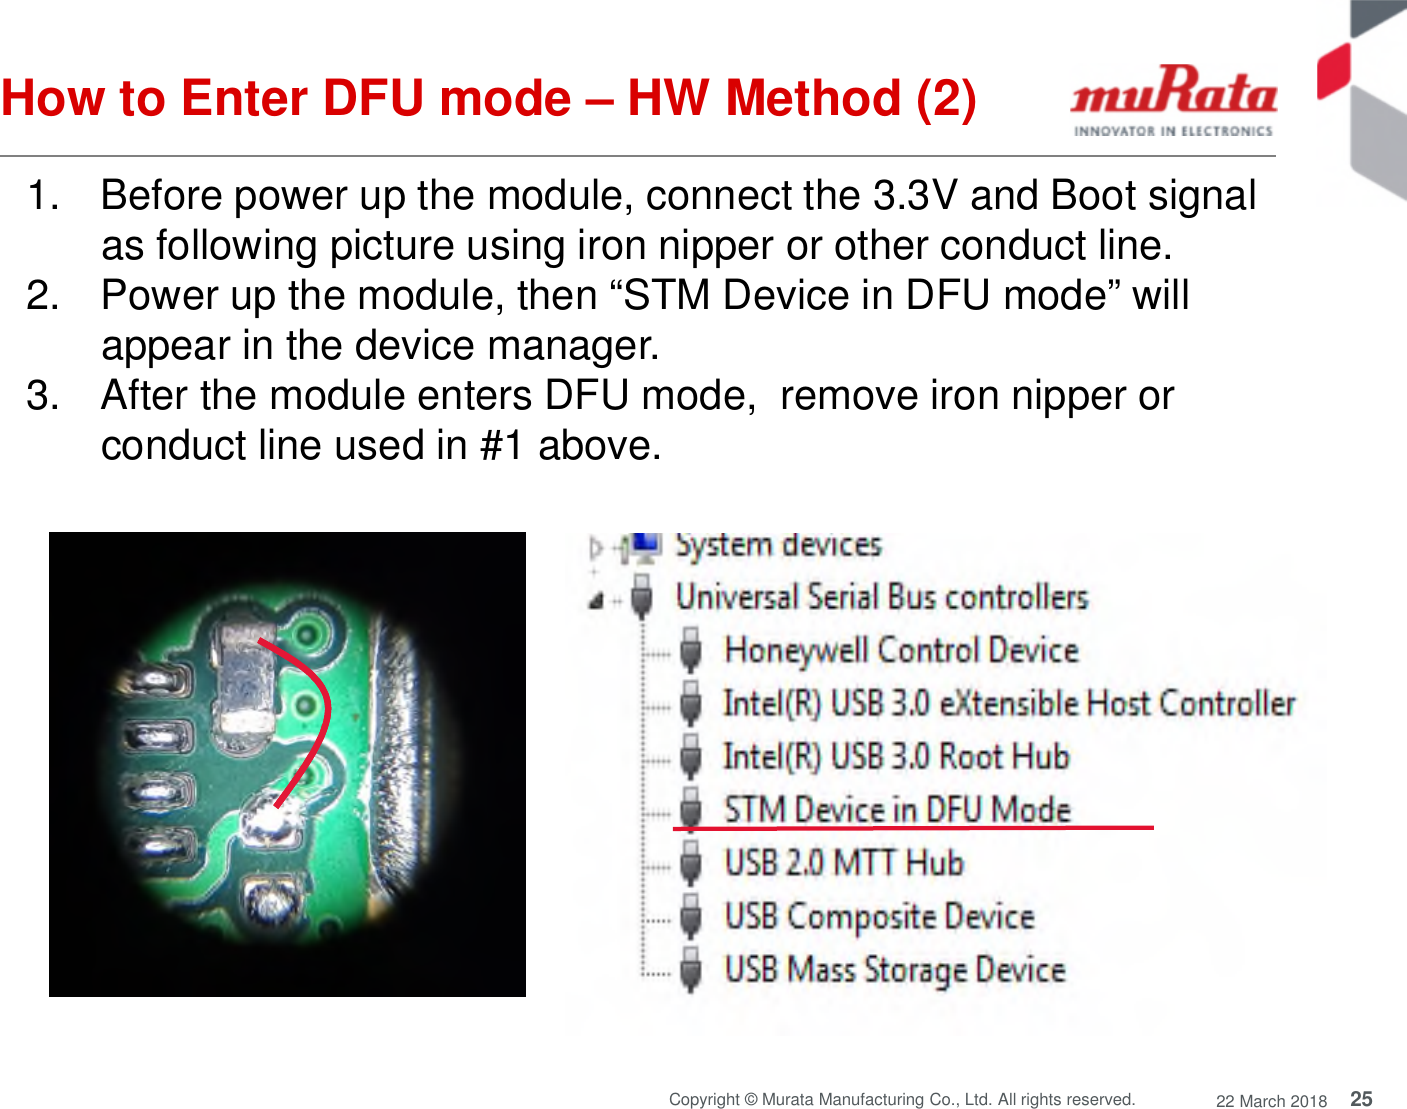 25Copyright © Murata Manufacturing Co., Ltd. All rights reserved. 22 March 2018How to Enter DFU mode – HW Method (2)1. Before power up the module, connect the 3.3V and Boot signalas following picture using iron nipper or other conduct line.2. Power up the module, then “STM Device in DFU mode” willappear in the device manager.3. After the module enters DFU mode, remove iron nipper orconduct line used in #1 above.